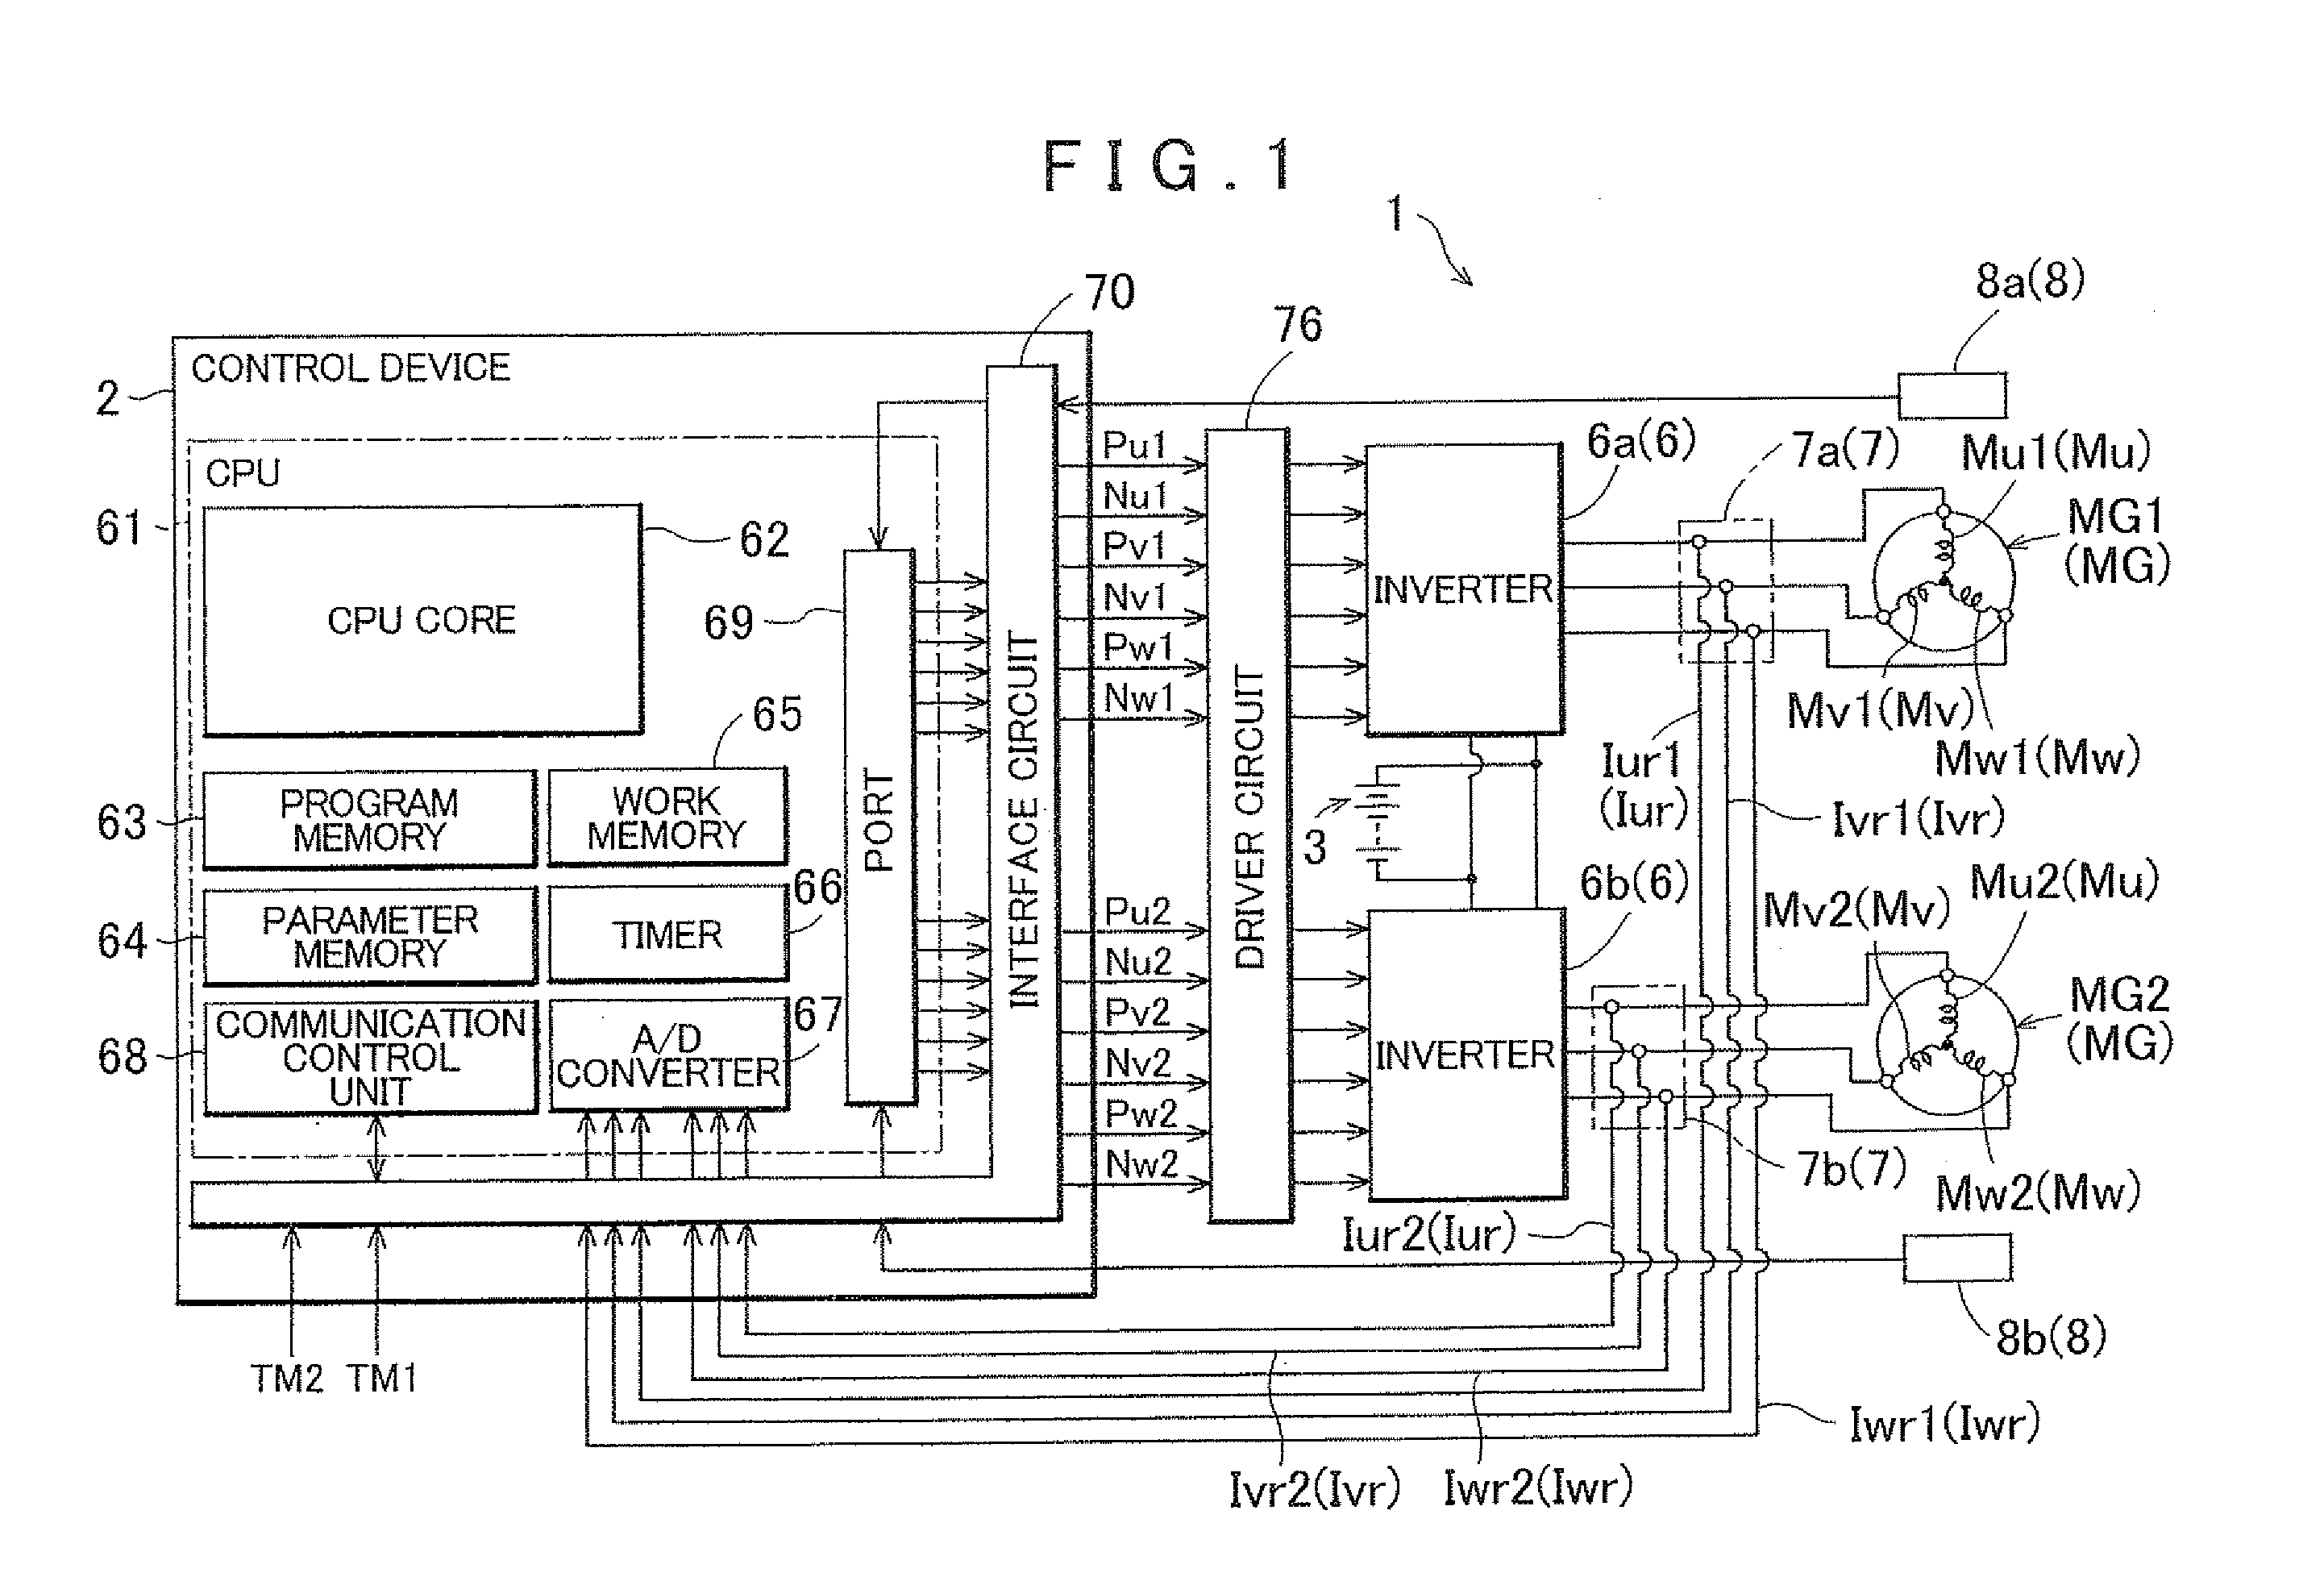 Control device for electric motor drive apparatus